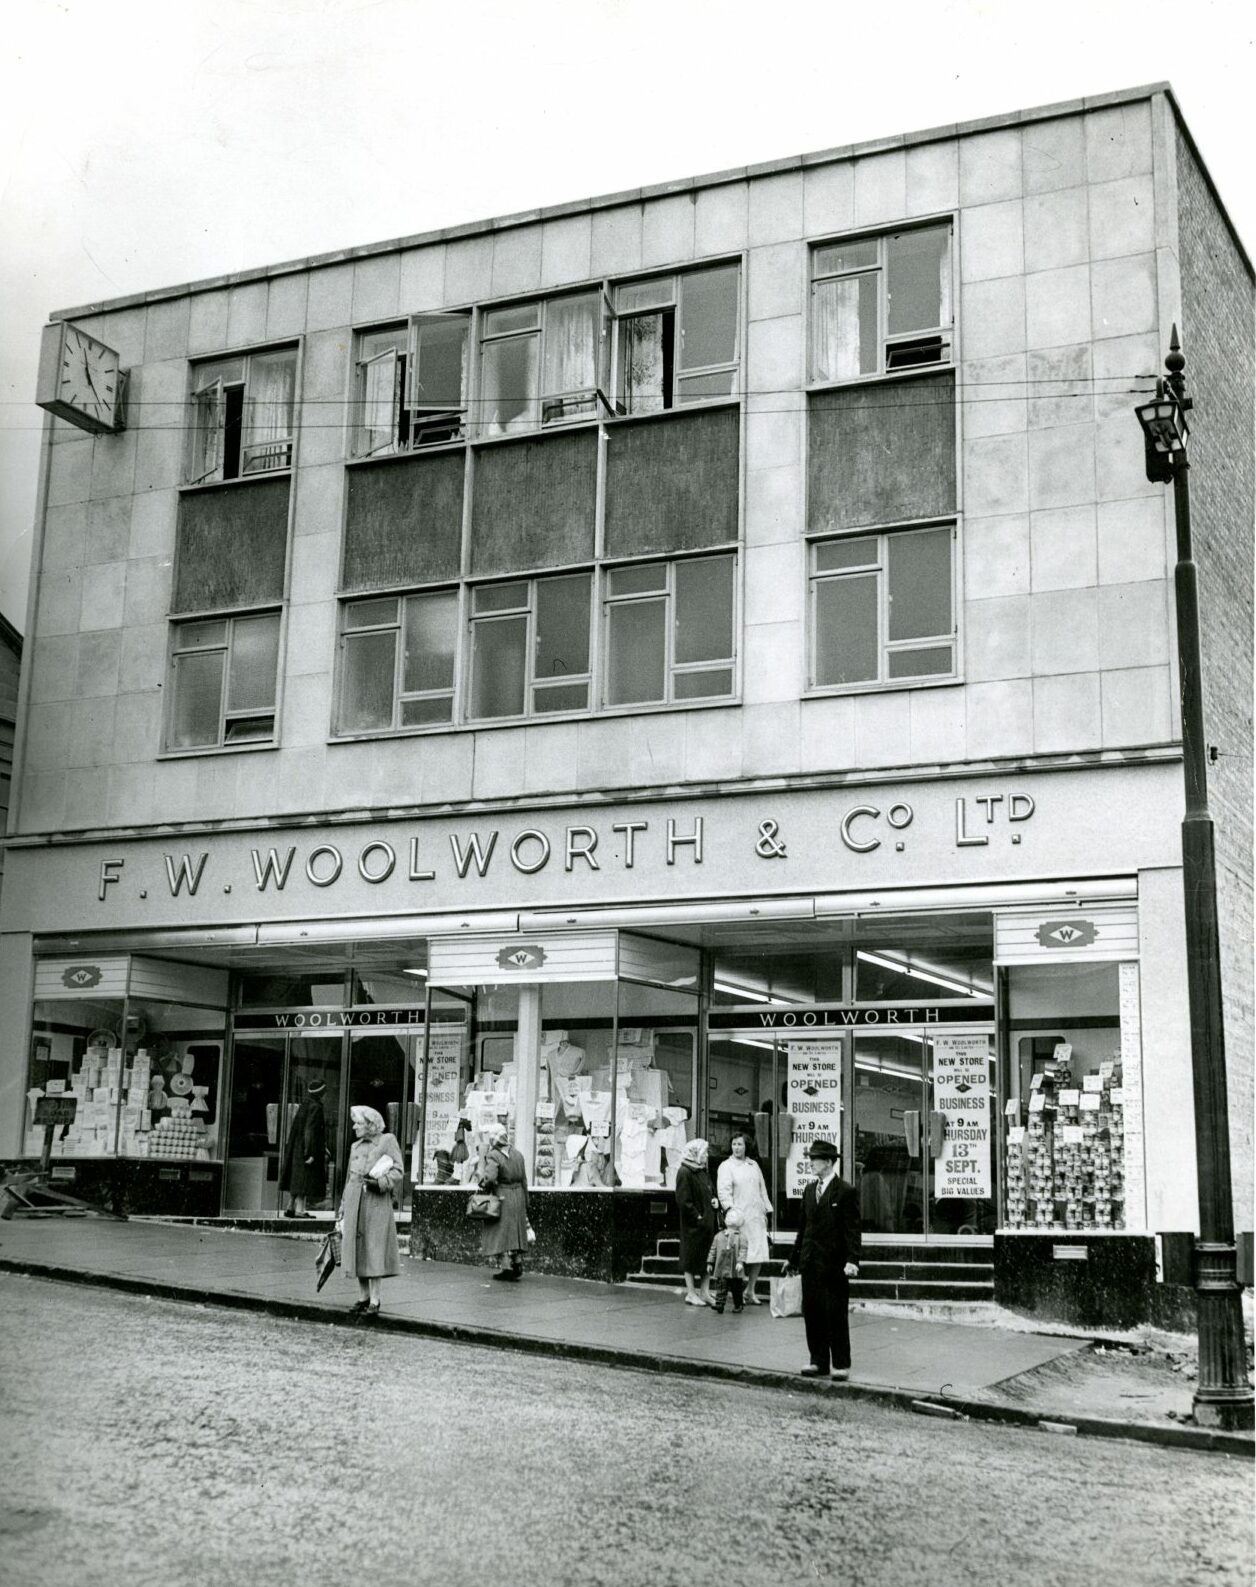 Woolworth and Co Ltd, High Street, Lochee.